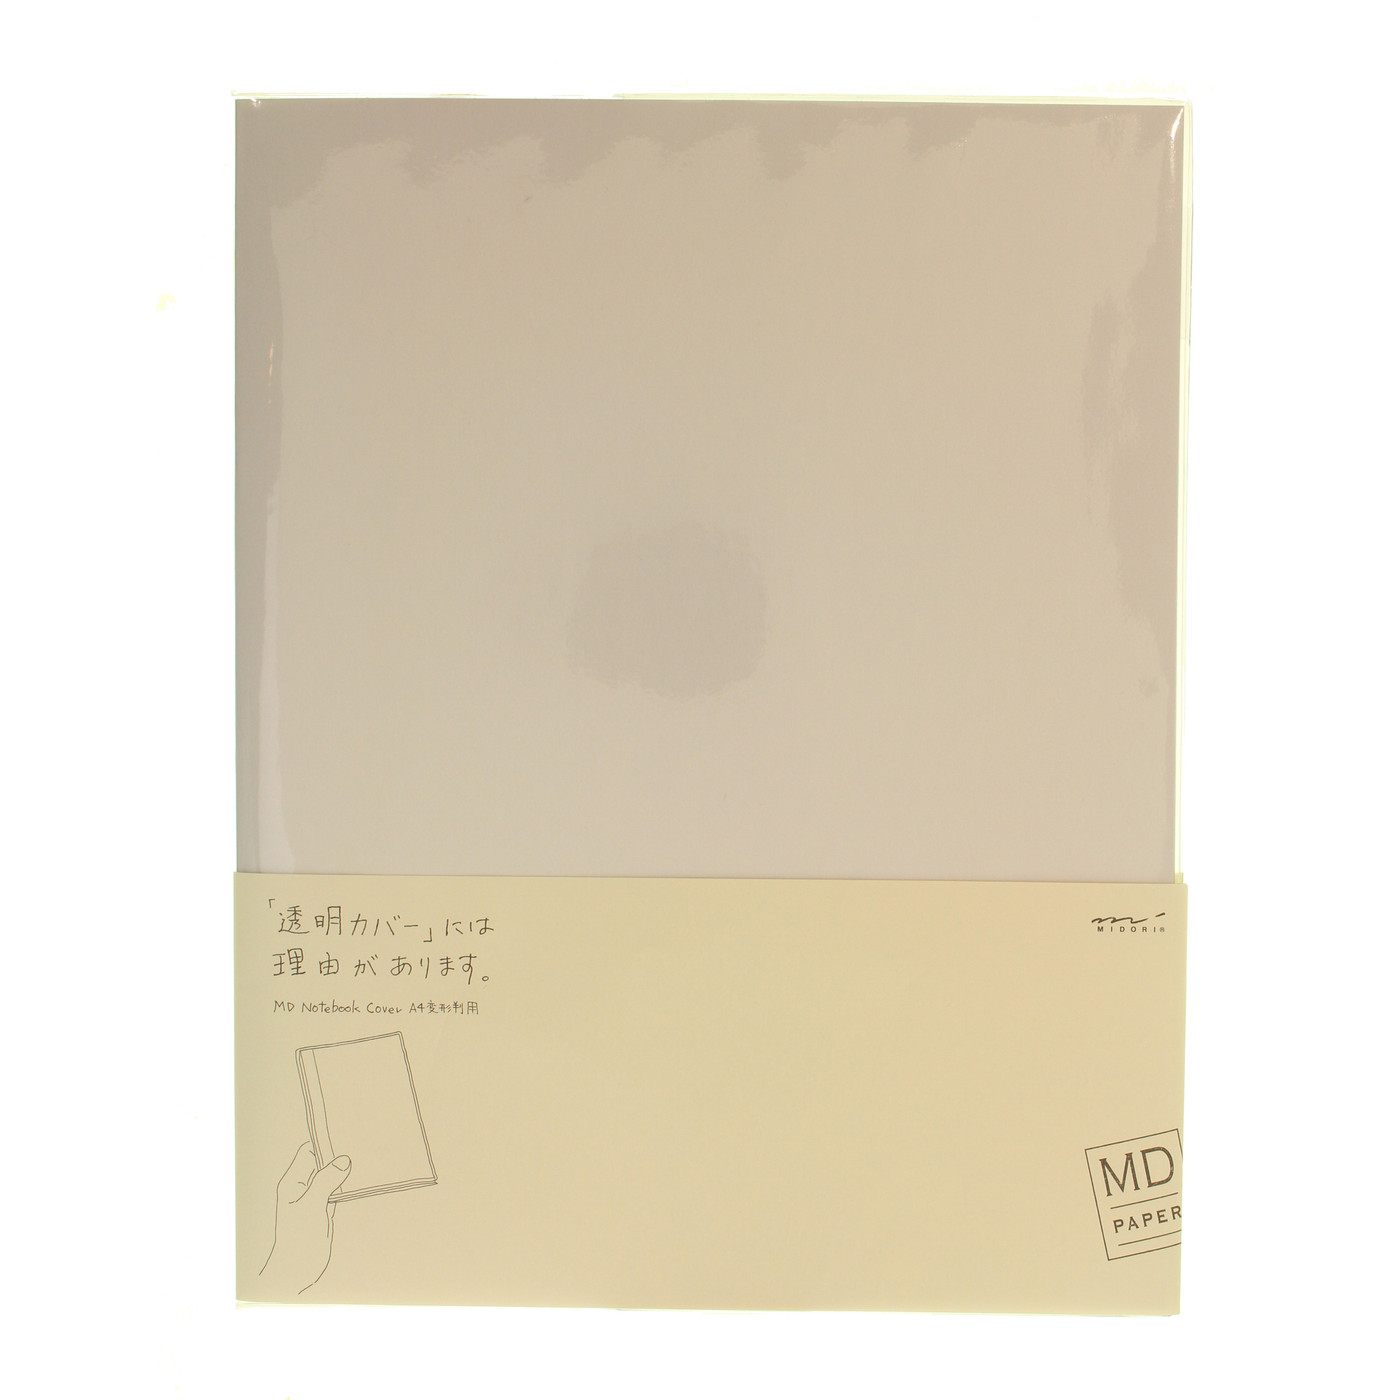 MD Paper notebook cover - CLEAR - A4 variant